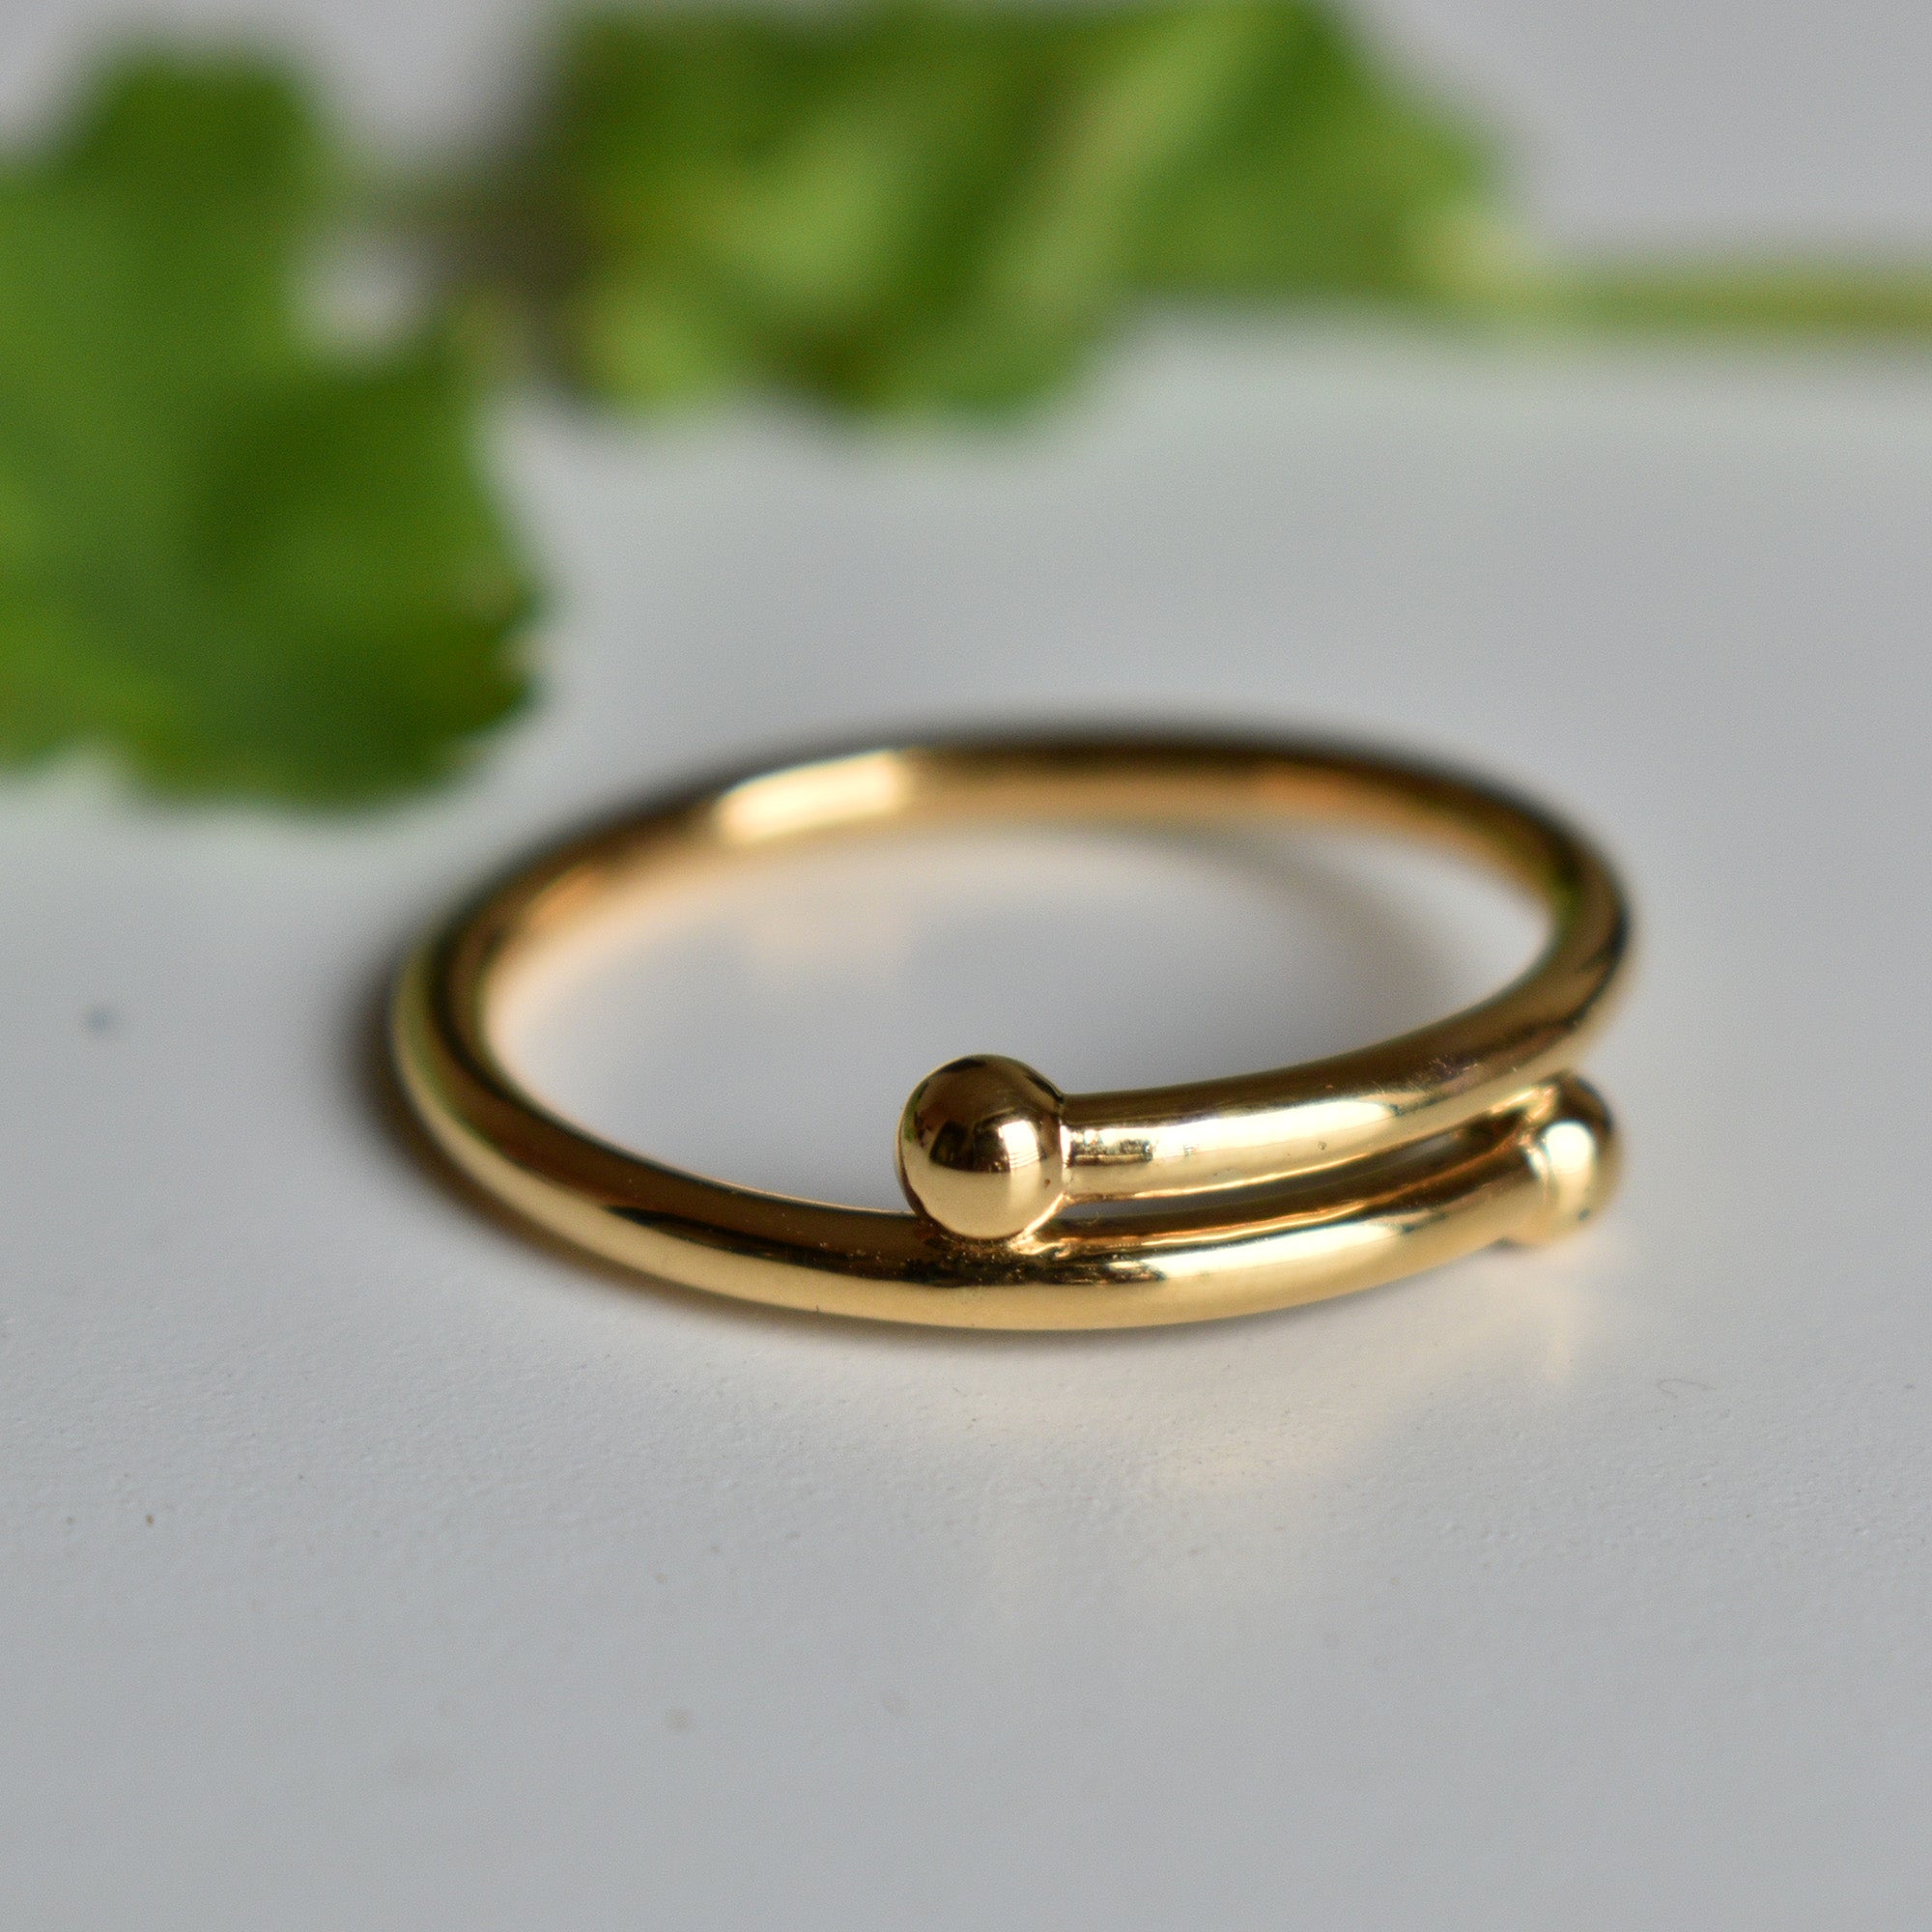 2mm Solid 14k Yellow Gold Bypass Ring with 3mm Ball Ends